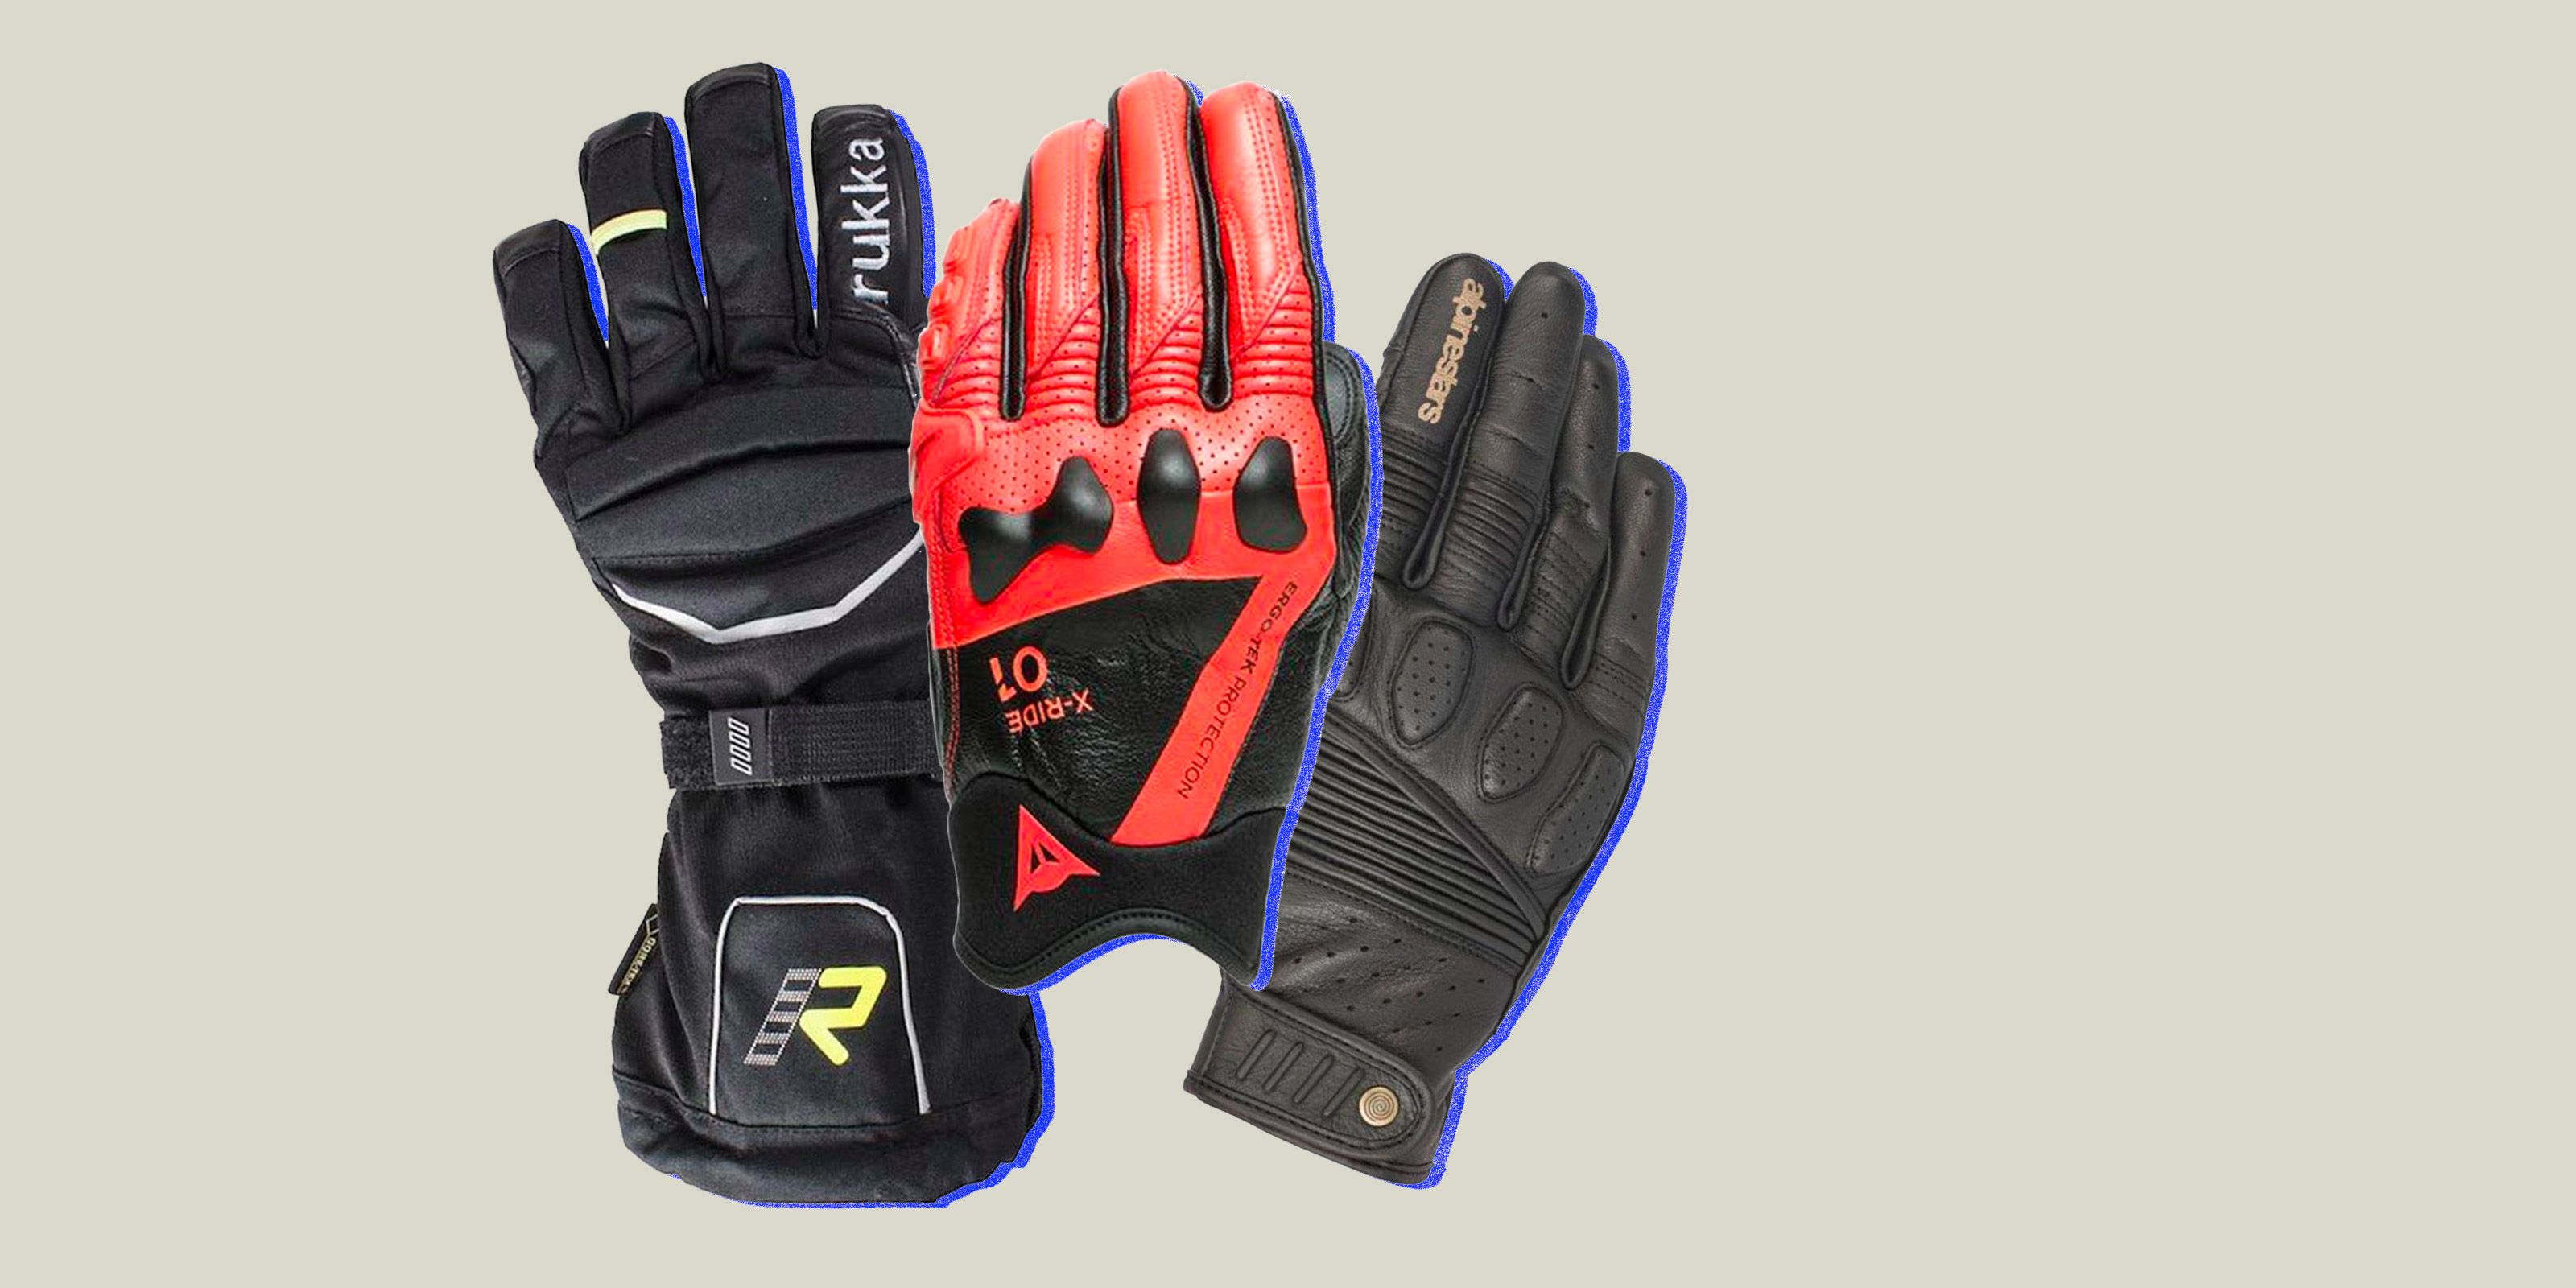 The Best Motorcycle Gloves You Can Buy Dainese, Aether and More